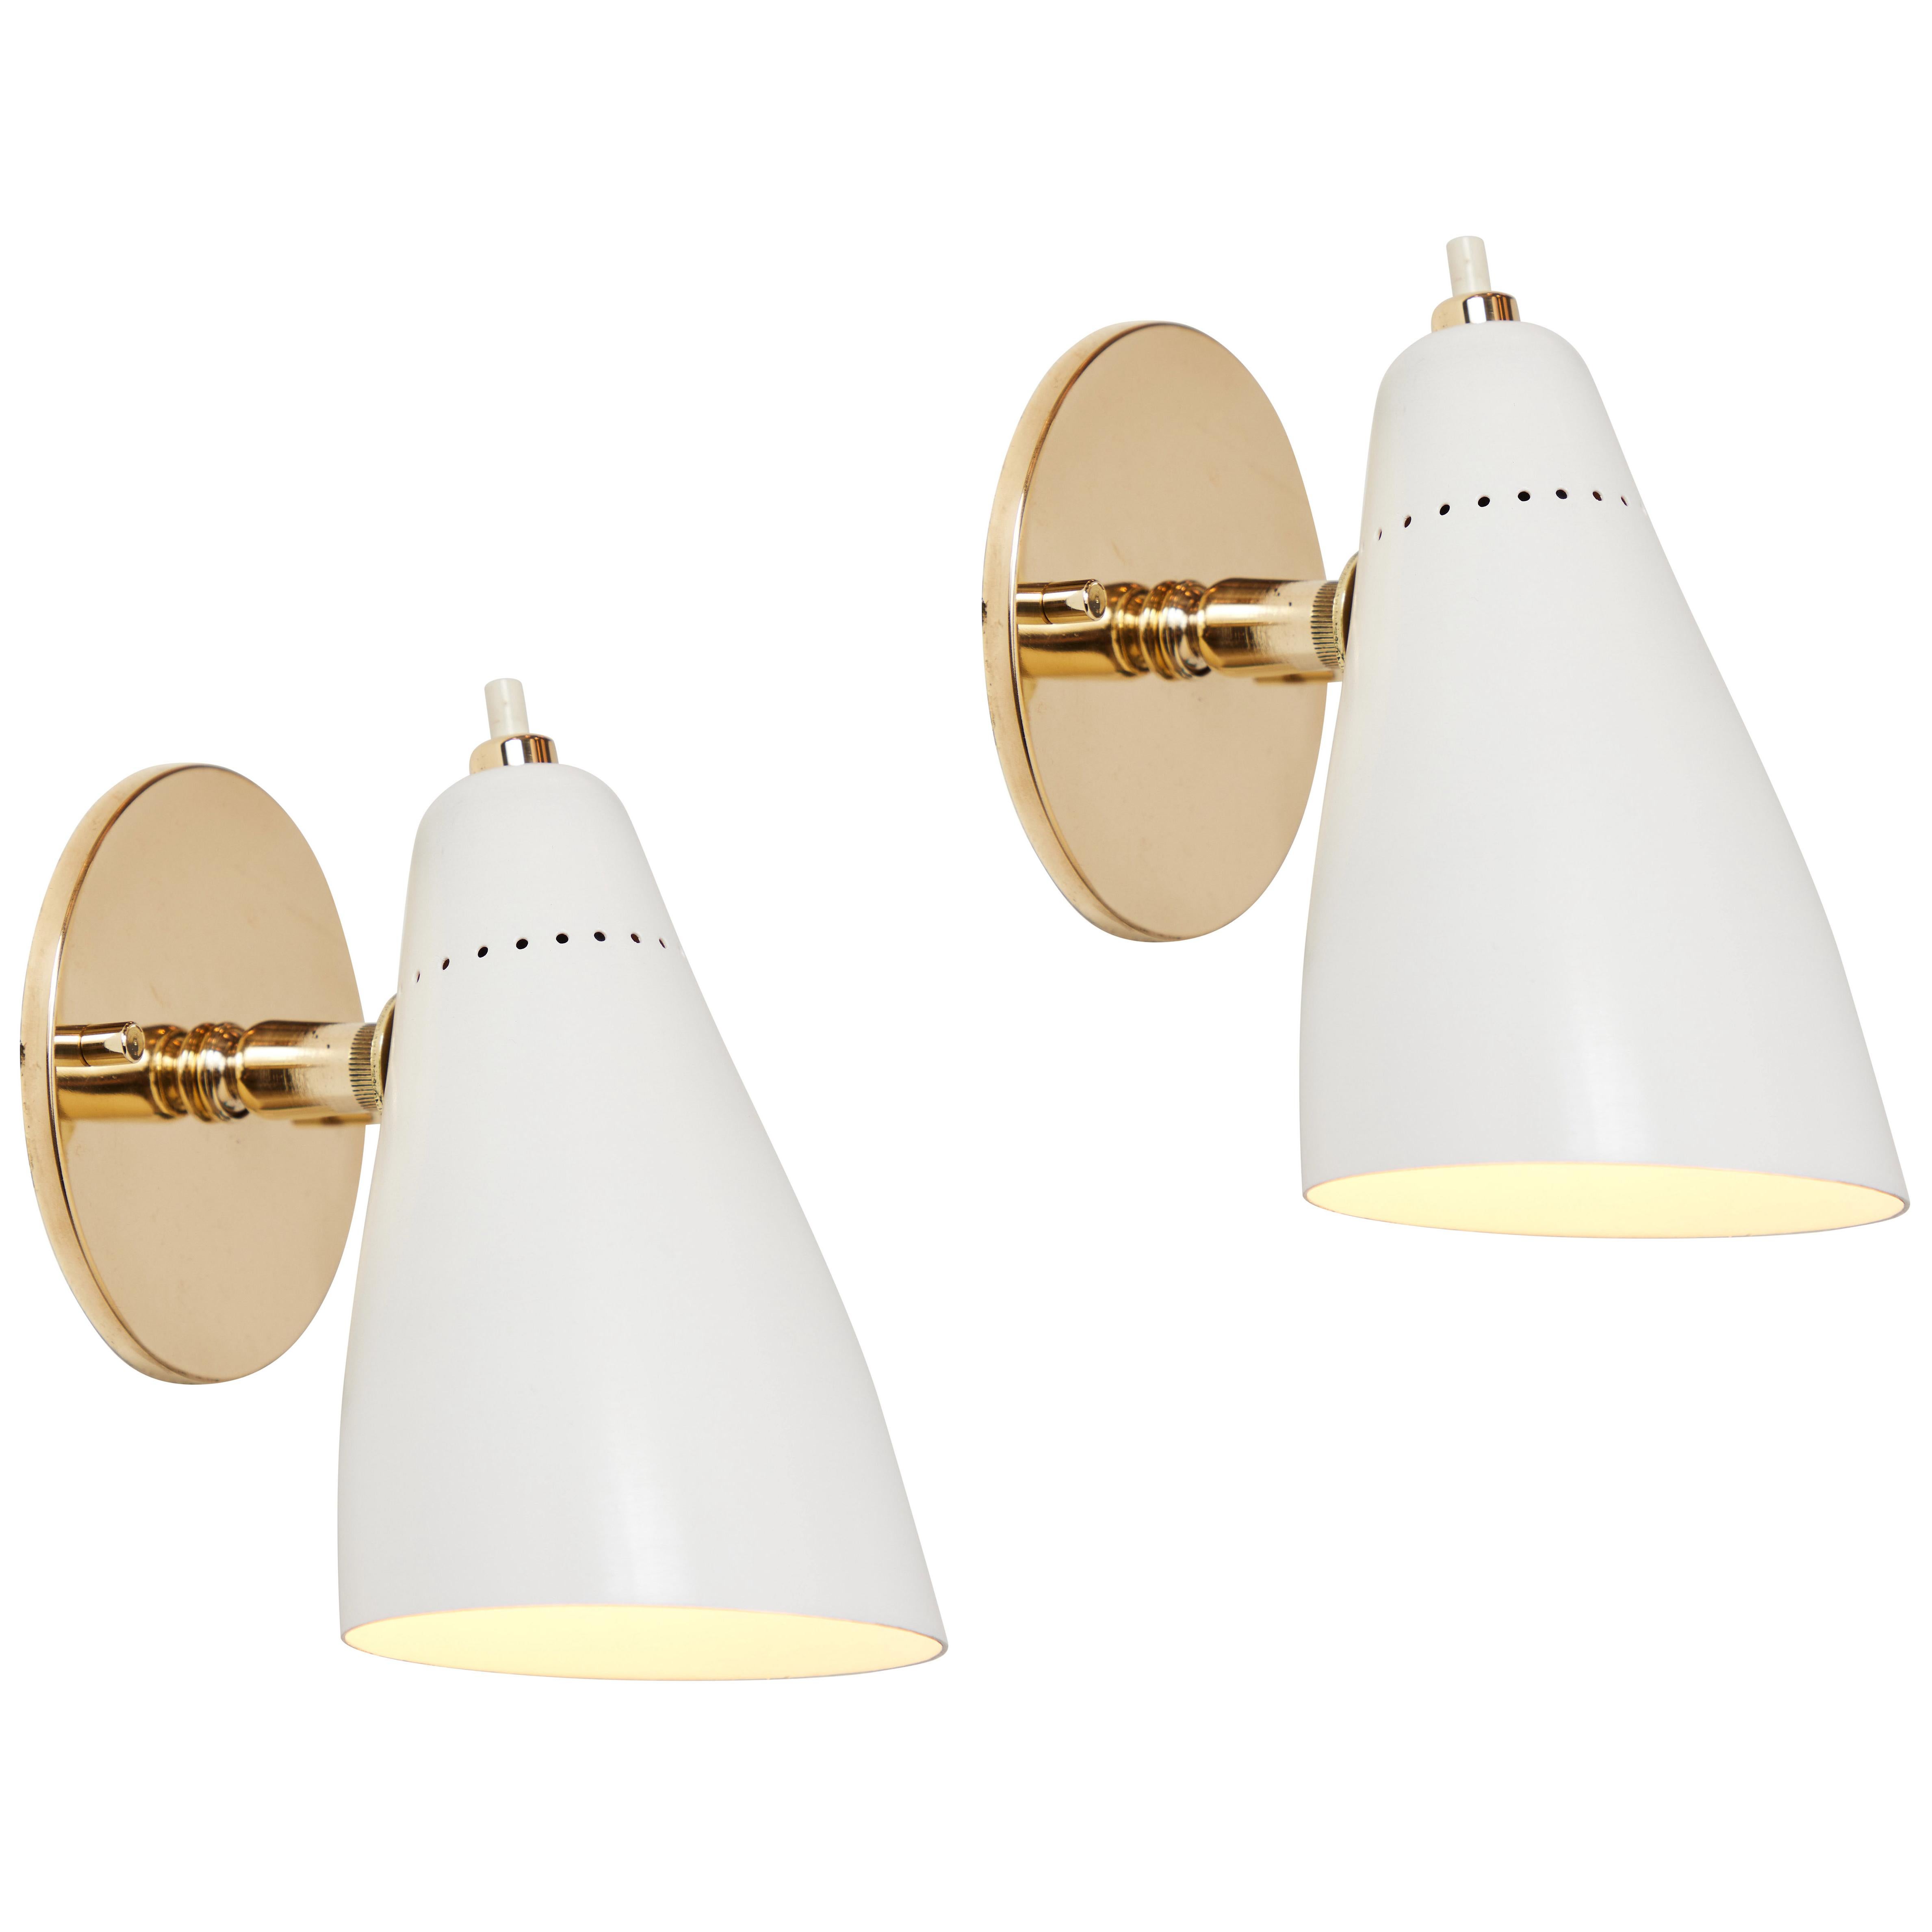 1950s Giuseppe Ostuni white articulating sconces for O-Luce. Executed in brass and white painted aluminum with perforated shade. Sconces pivot up/down and left/right. 

Price is per item. Four lamps available.

Original on/off switch on top of